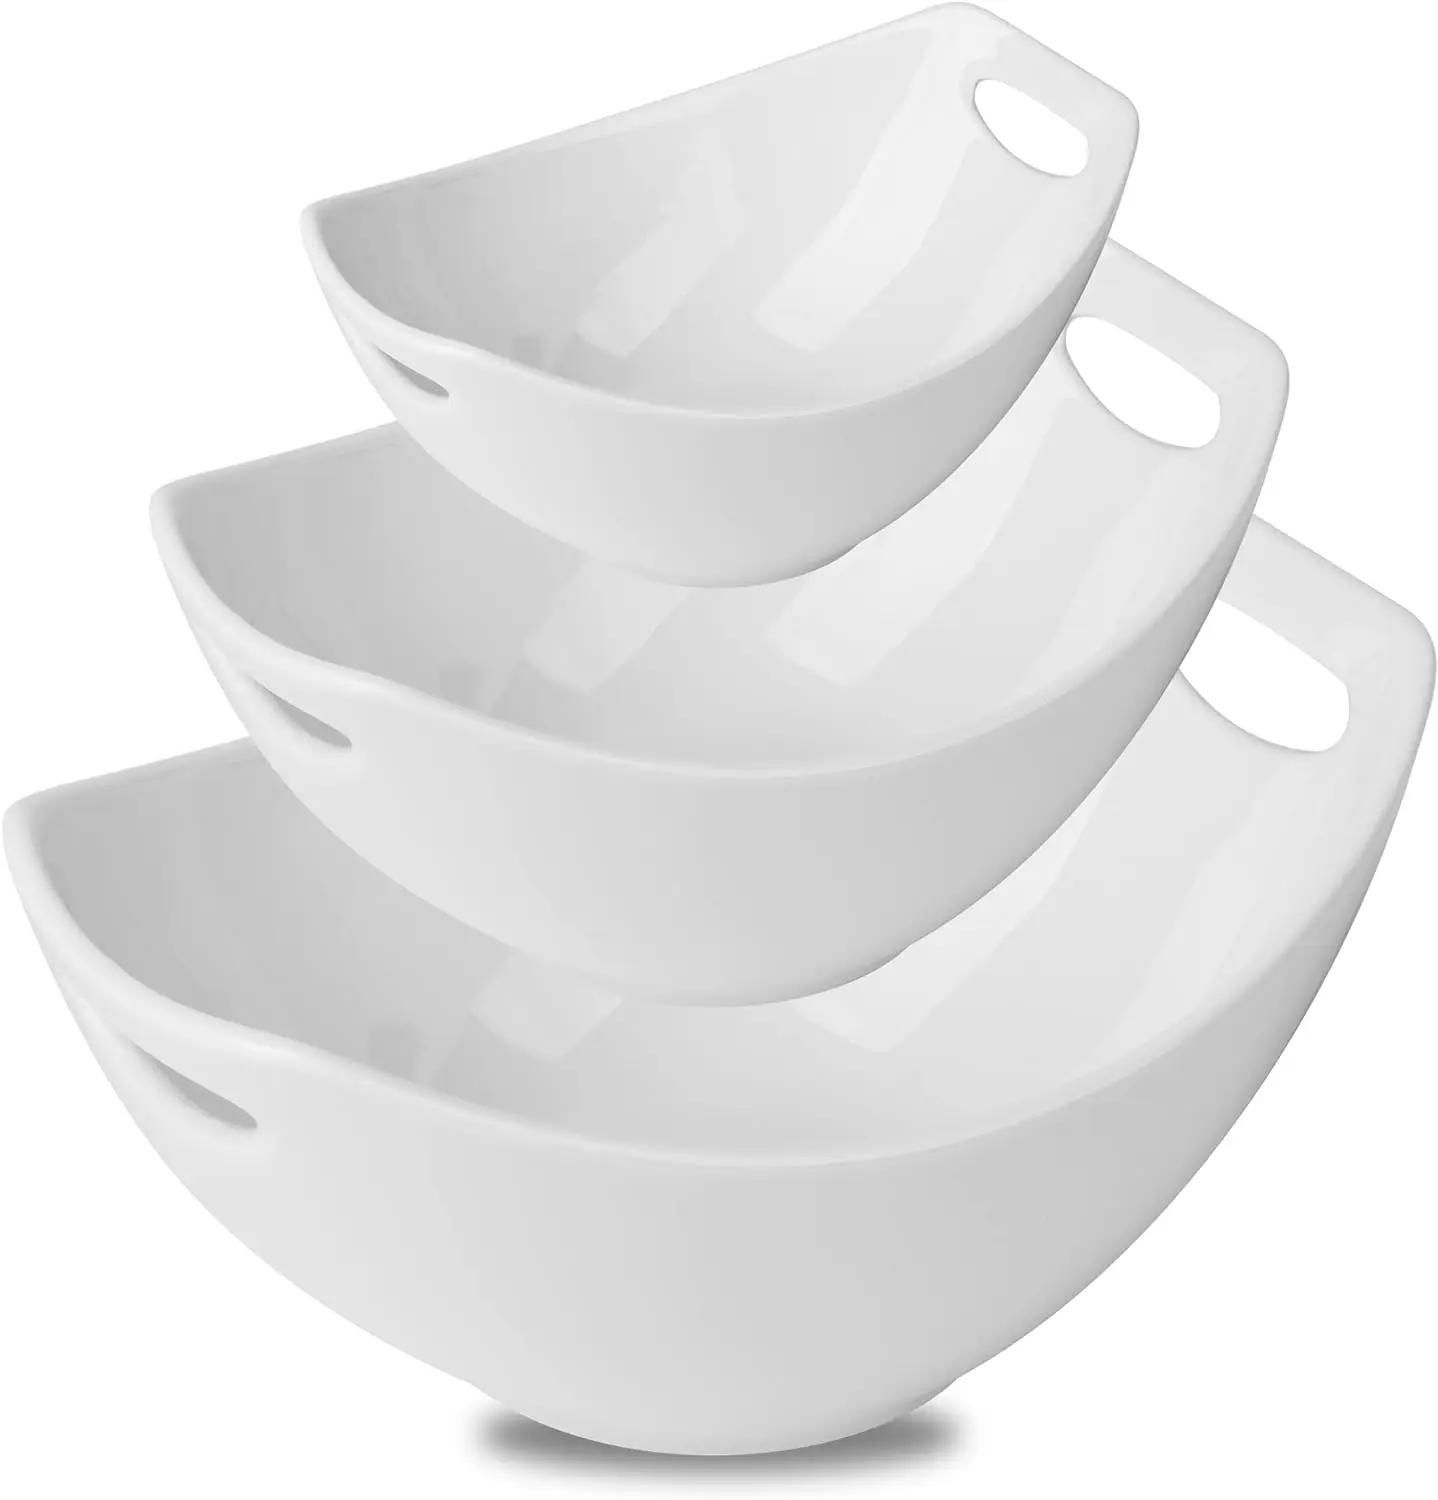 

Bowls with Handles, Serving Dishes, Porcelain Salad Bowls Mixing Bowl for Entertaining, Nesting Bowl Set of 3, Microwave Dishwas